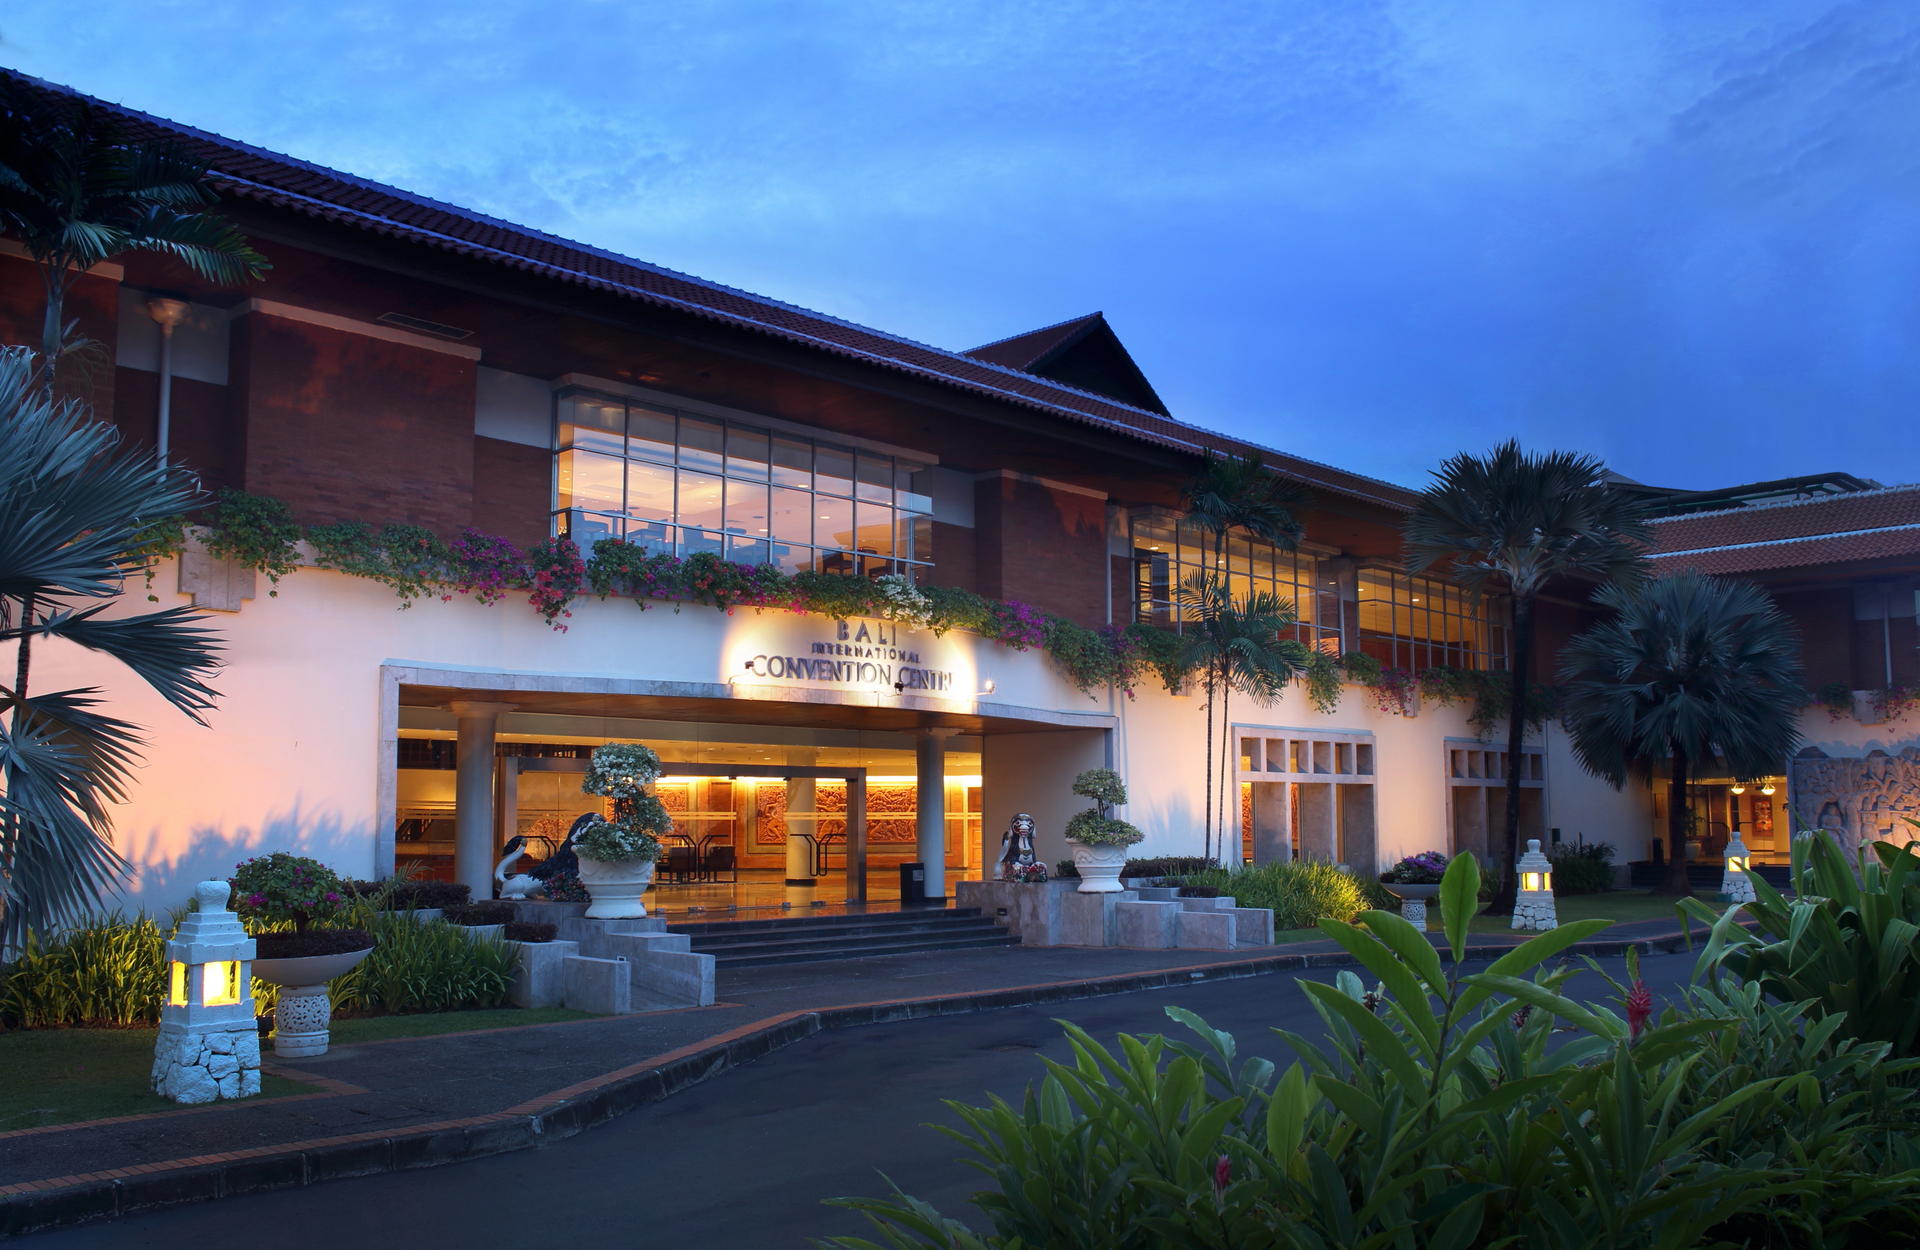 The Bali International Convention Centre, managed by The Westin Resort Nusa Dua, can accommodate up to 2,500 people for meetings.